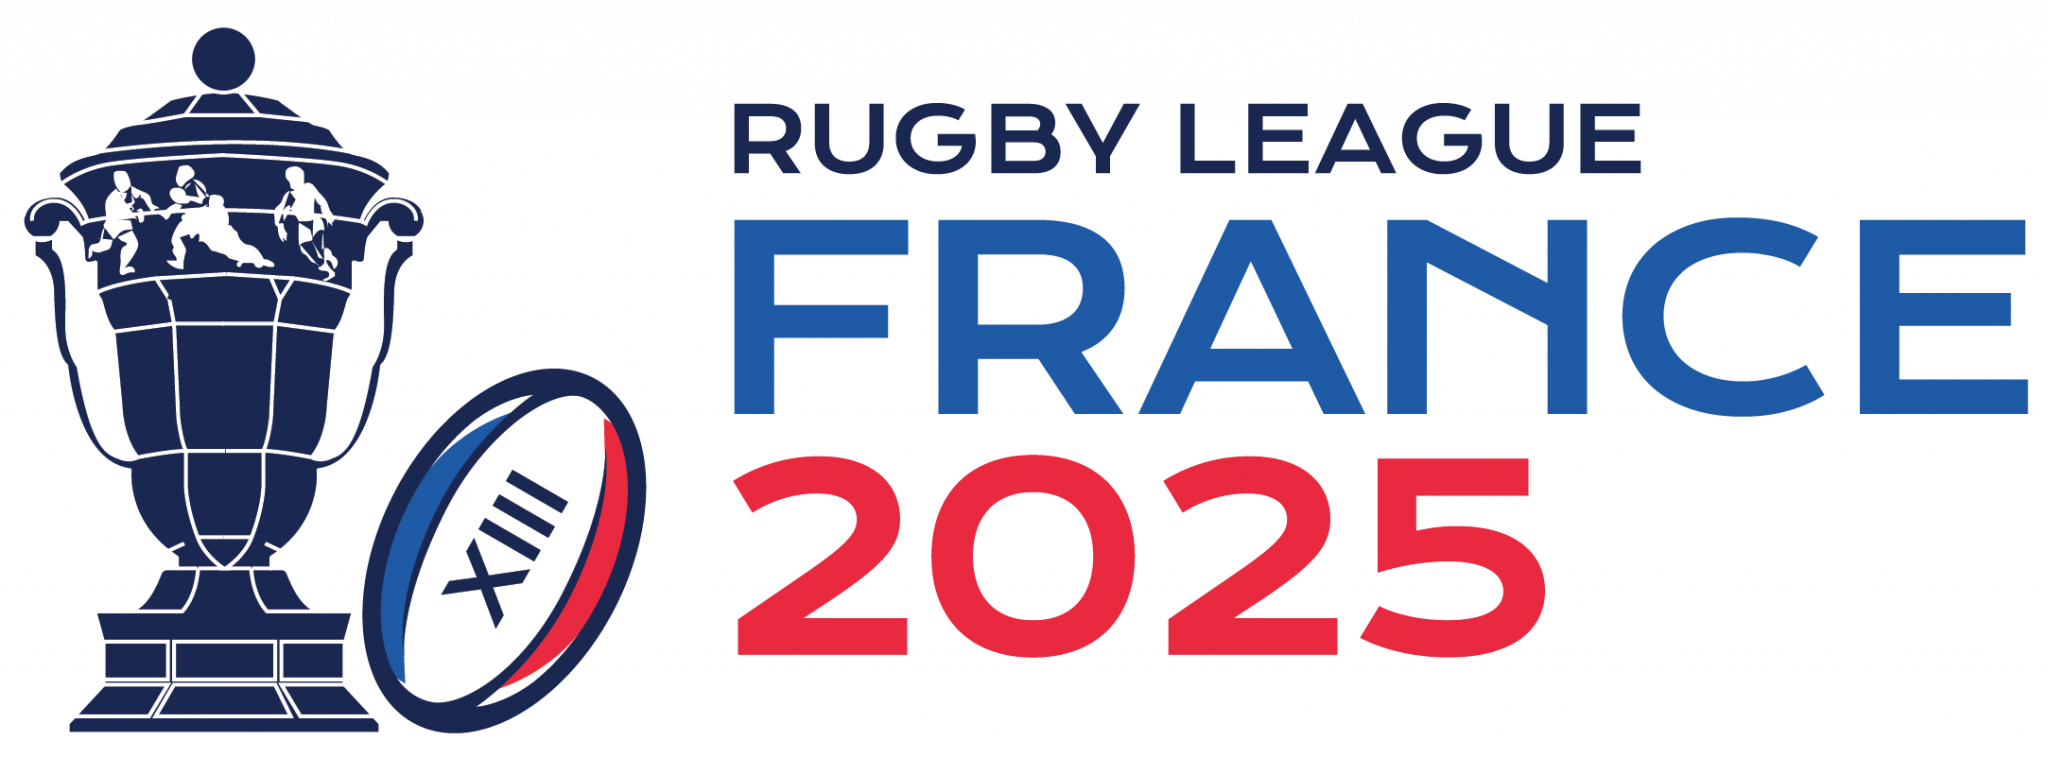 International Rugby League had already named France as its preferred host for 2025 ©FFRXIII